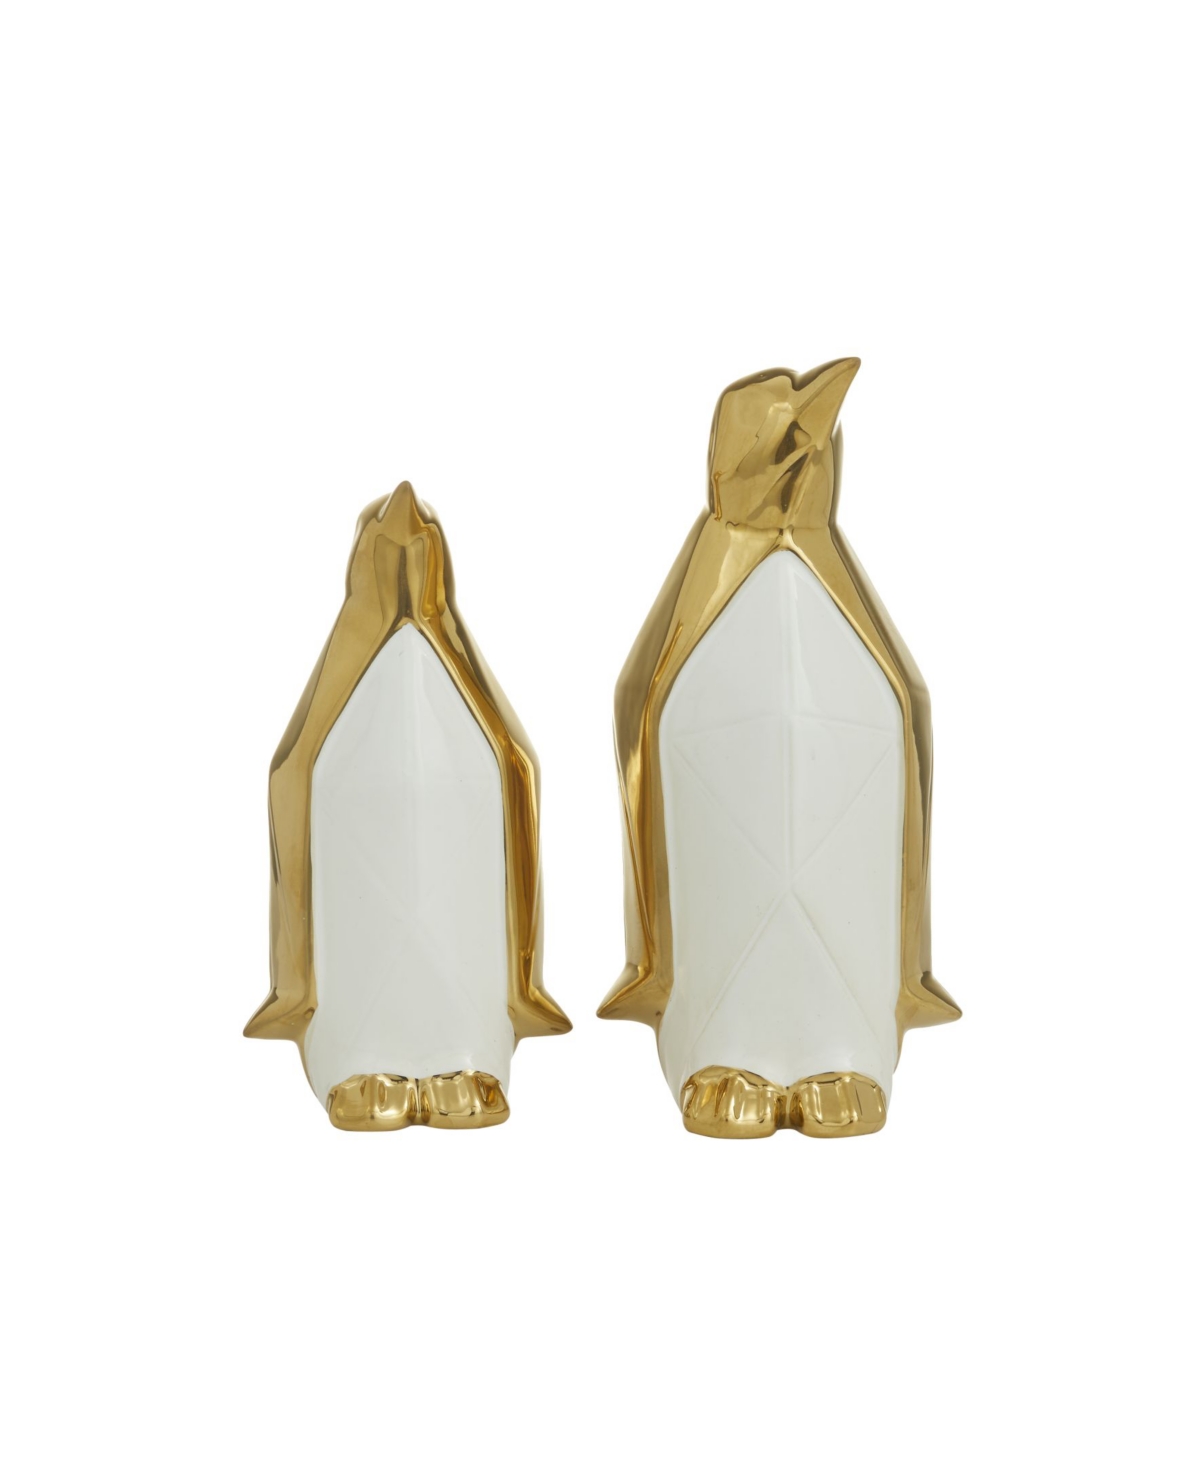 Rosemary Lane Cosmoliving By Cosmopolitan Glam Sculpture, Set Of 2 In Gold-tone